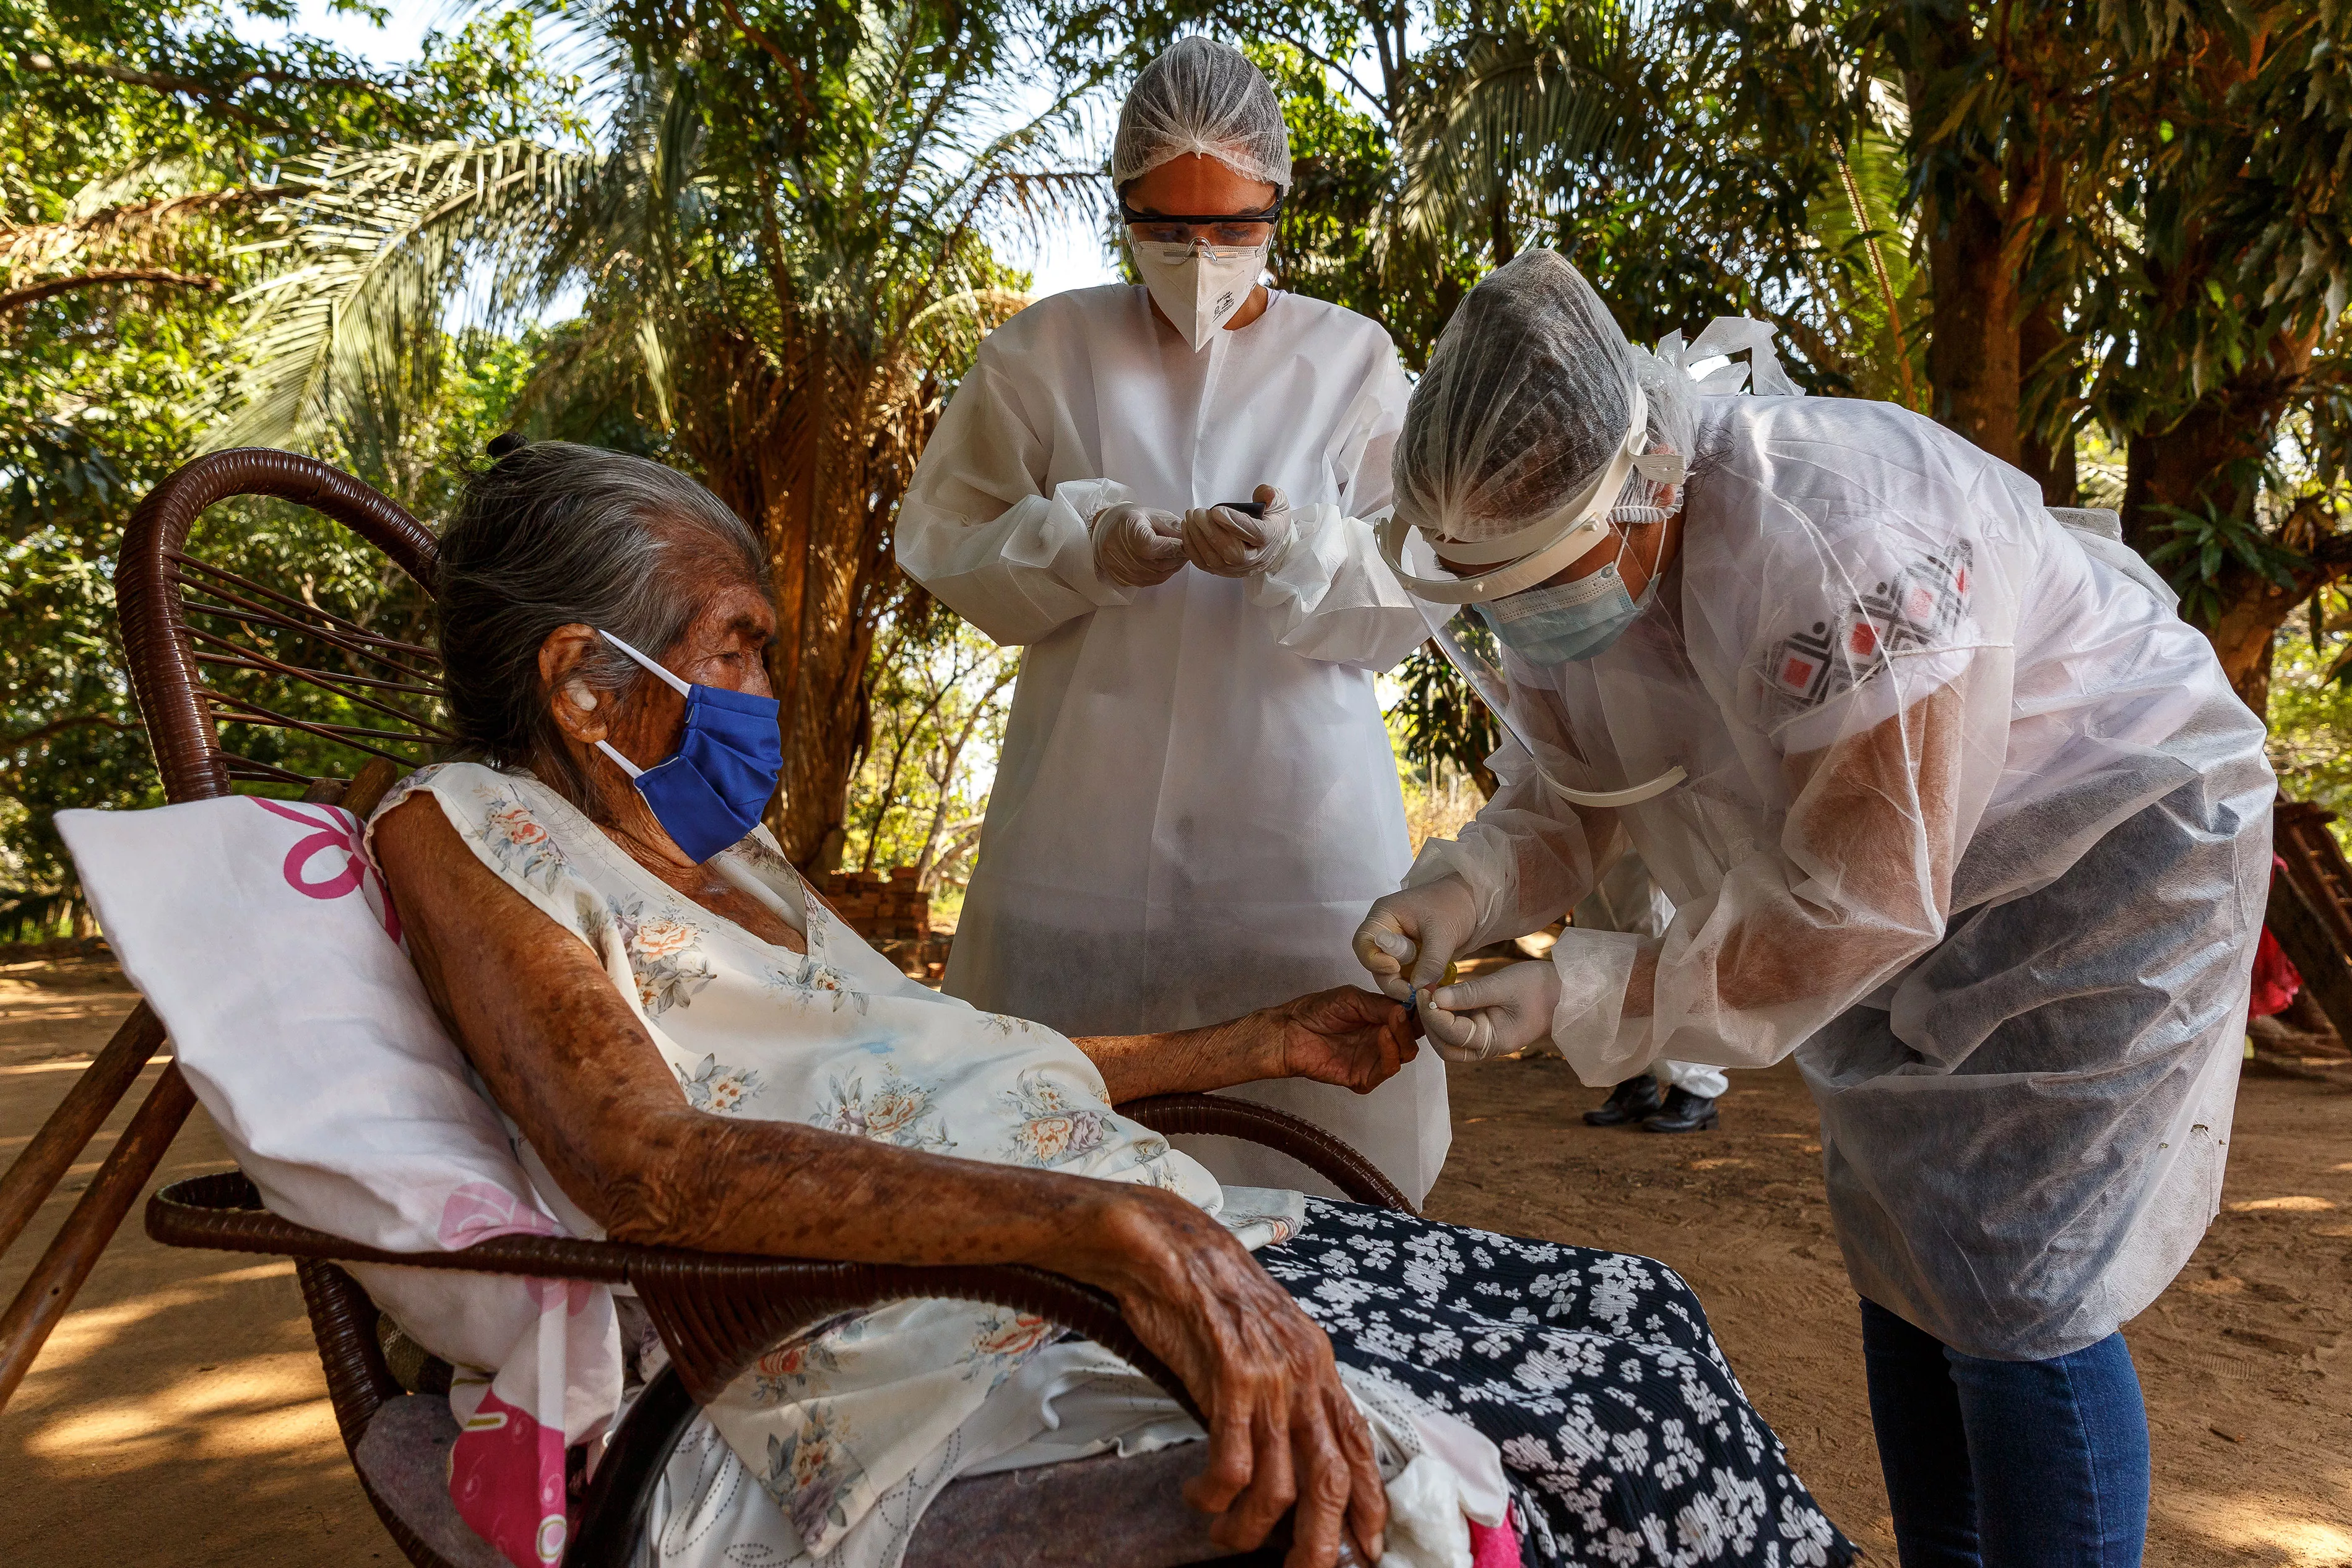 Nurse Mayra Leandro works with the health worker of the Special Indigenous Health District of Mato Grosso do Sul (DSEI MS) who attends patients at Lagoinha village. The sugar level of her blood is tested, as many indigenous people suffer from diabetes. 